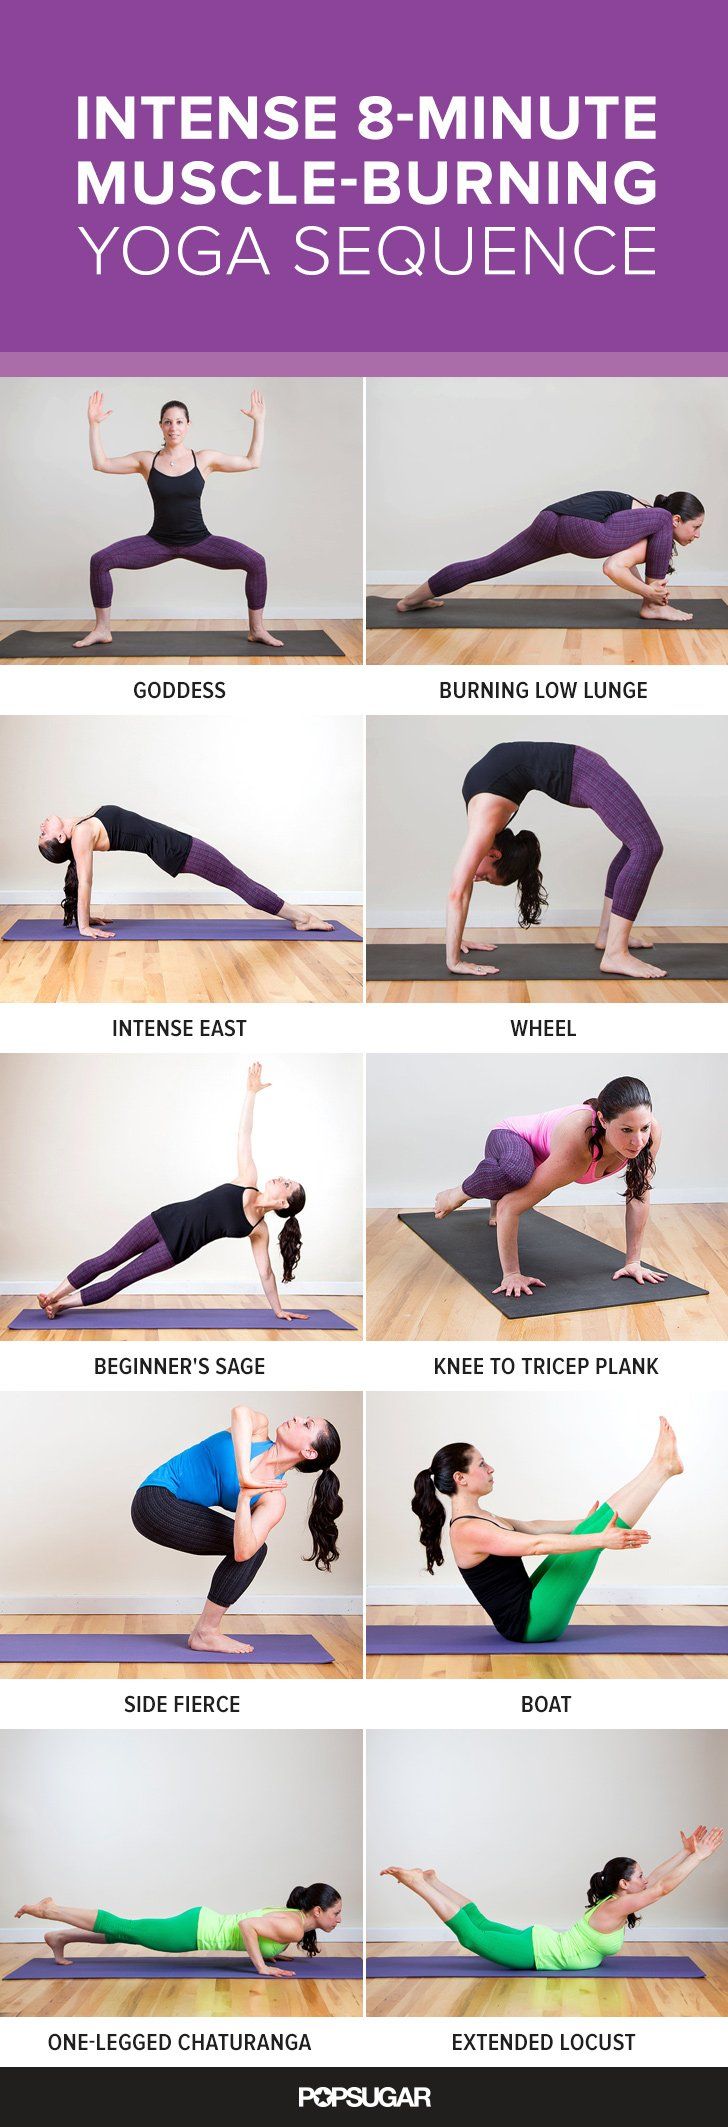 Get an Intense Burn With This 8-Minute Yoga Sequence